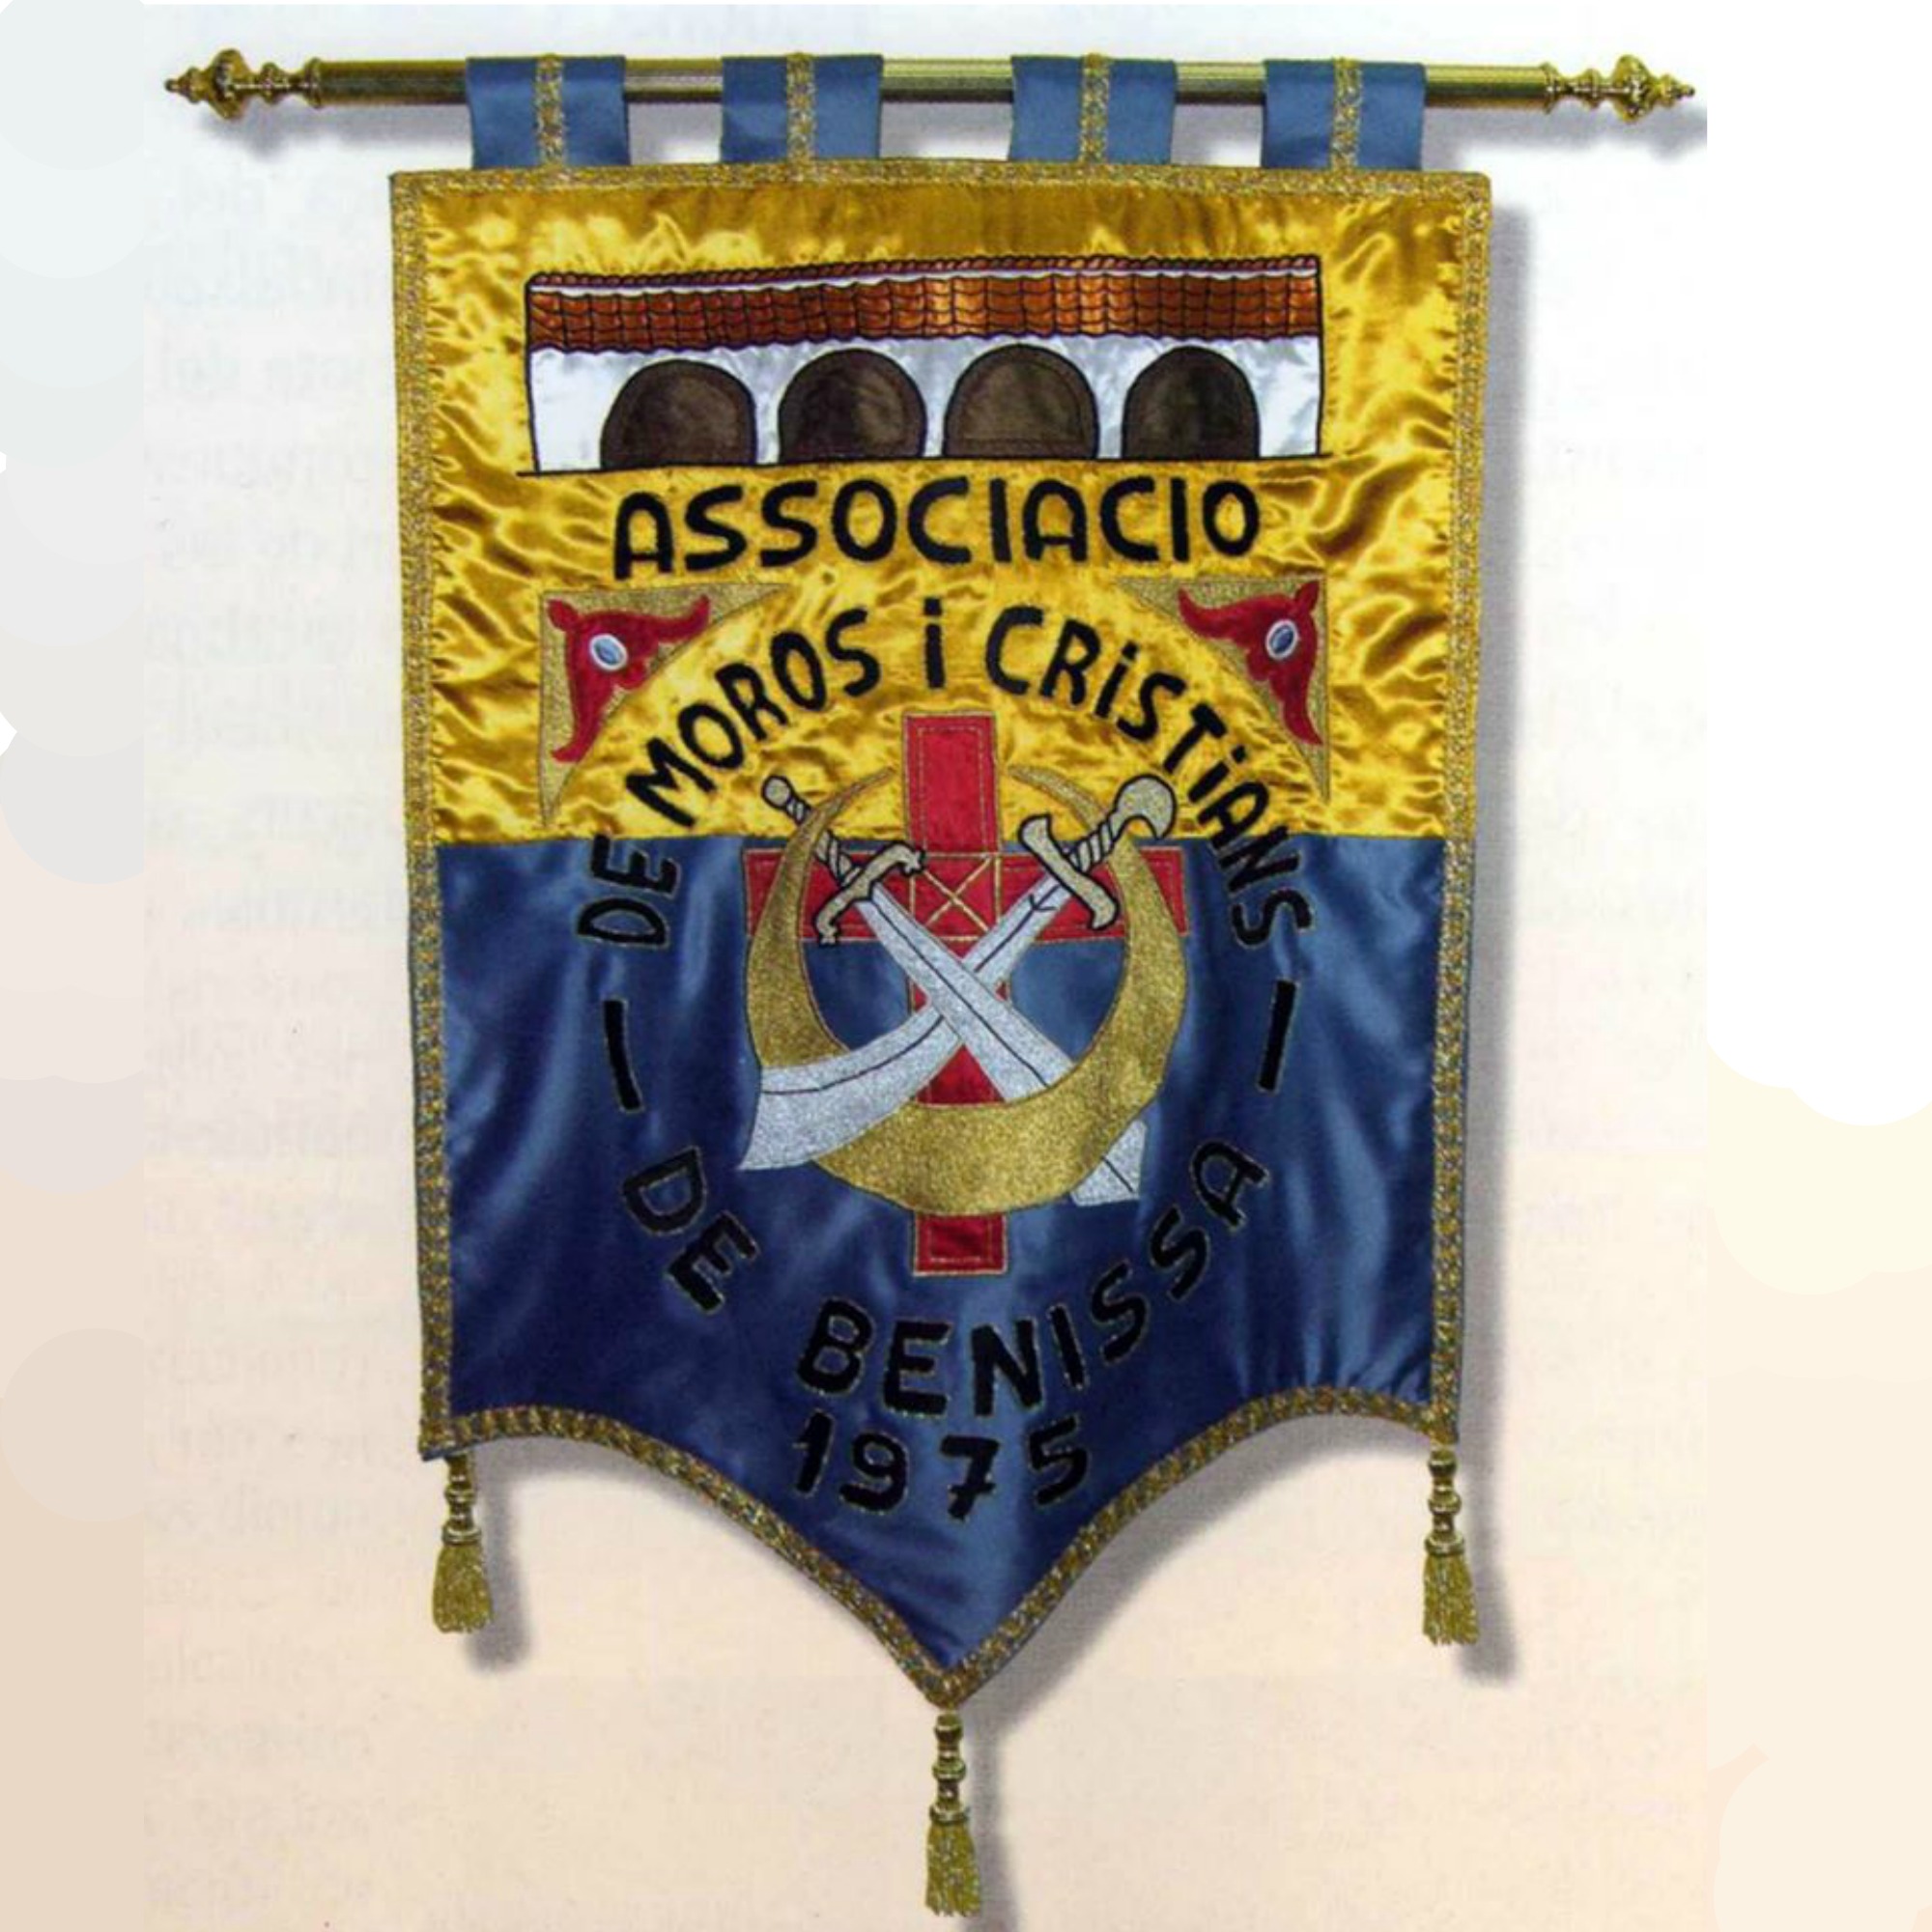 Moors and Christians Association 